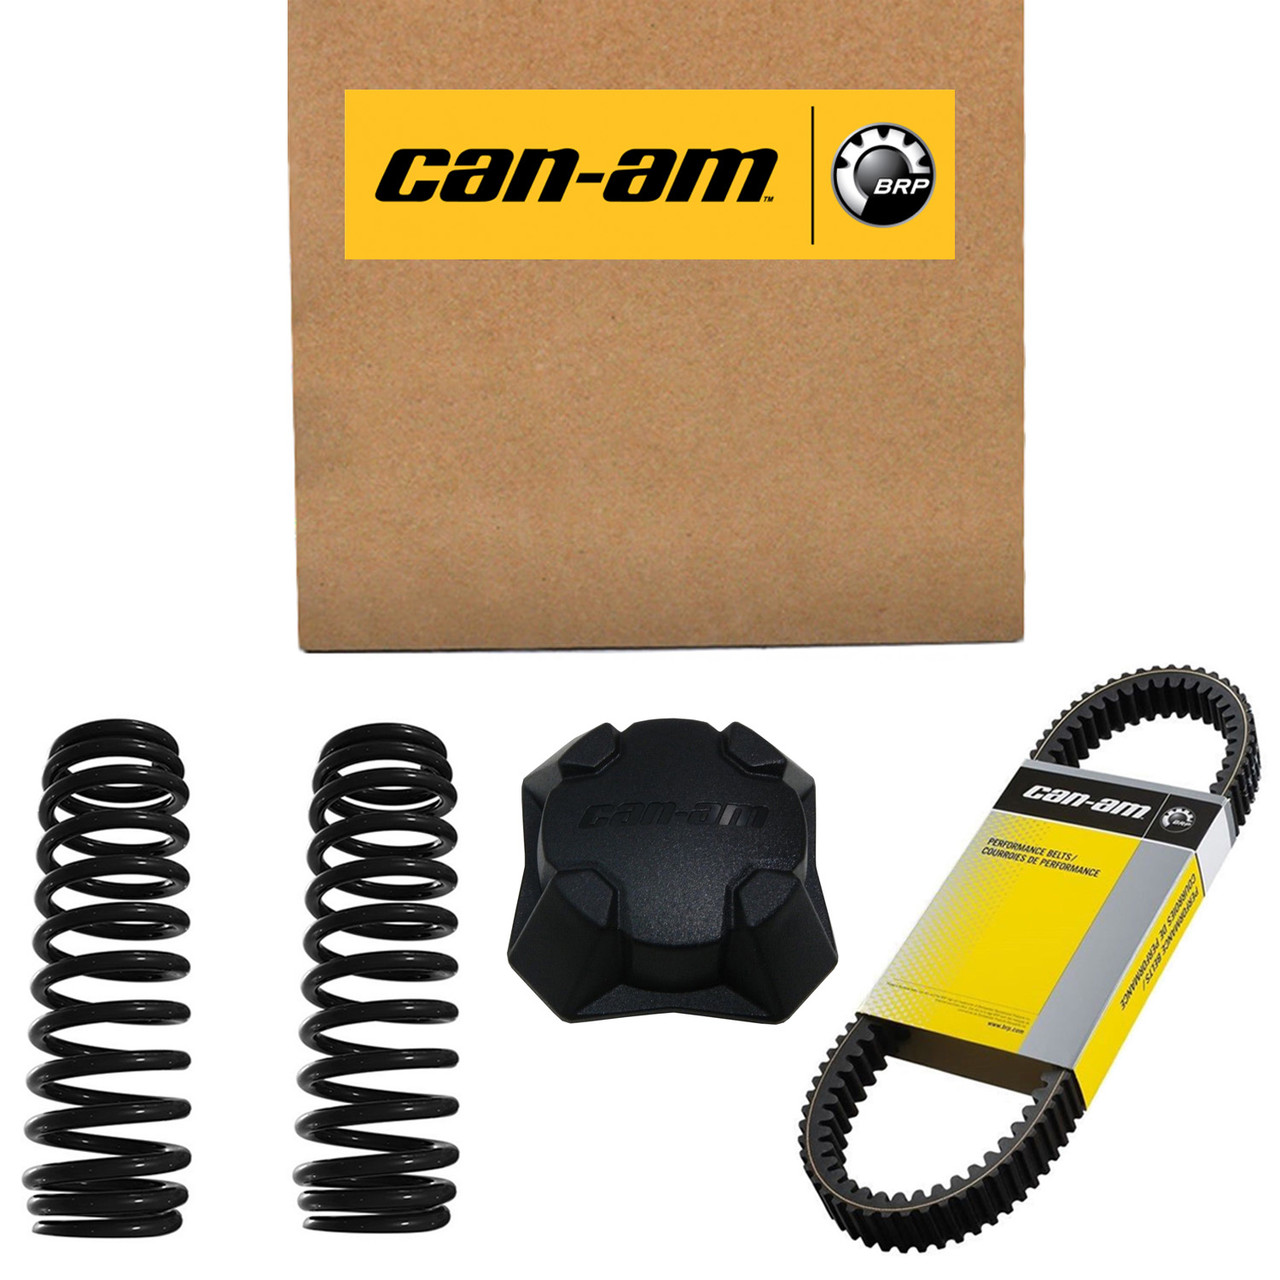 Can-Am New OEM Wiring Harness, 420666551